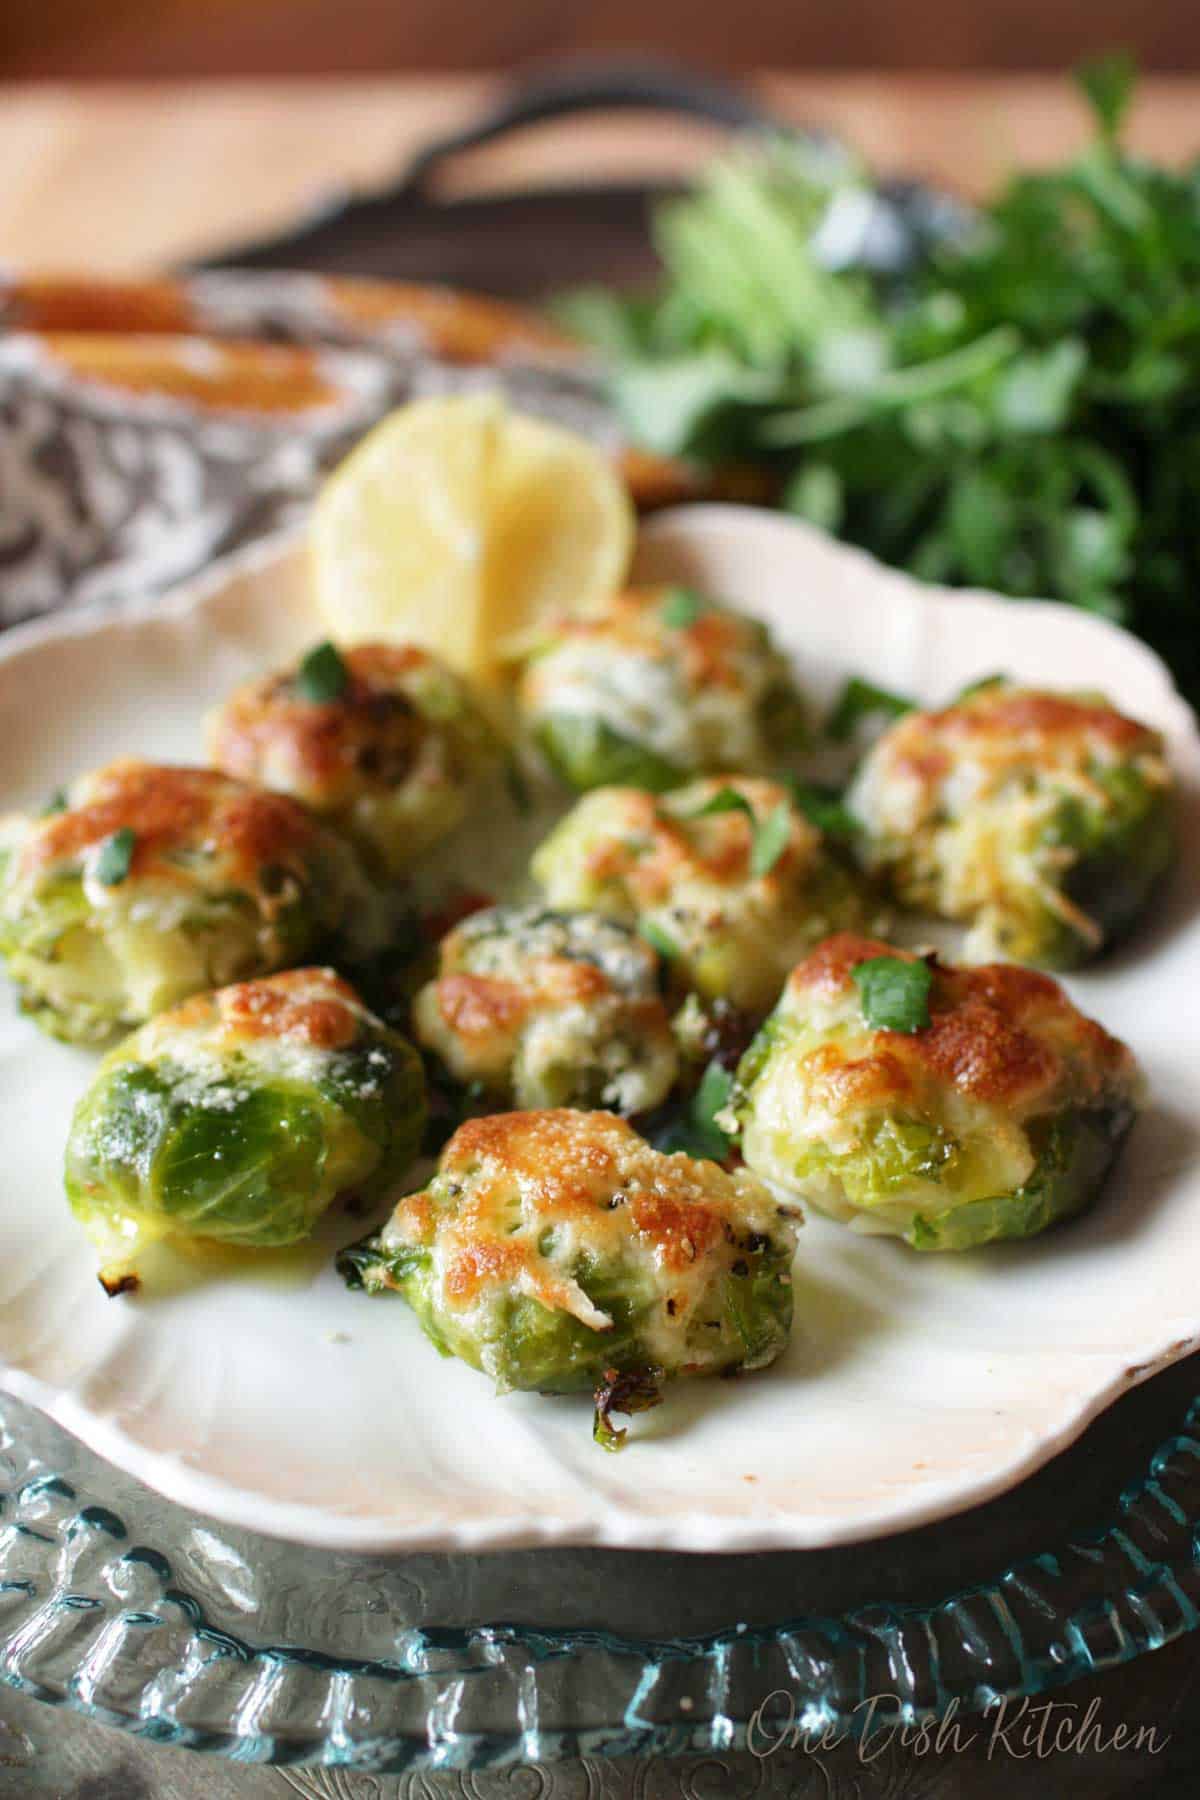 How to tell if Brussel Sprouts are bad? Example Pics & All the Tips!